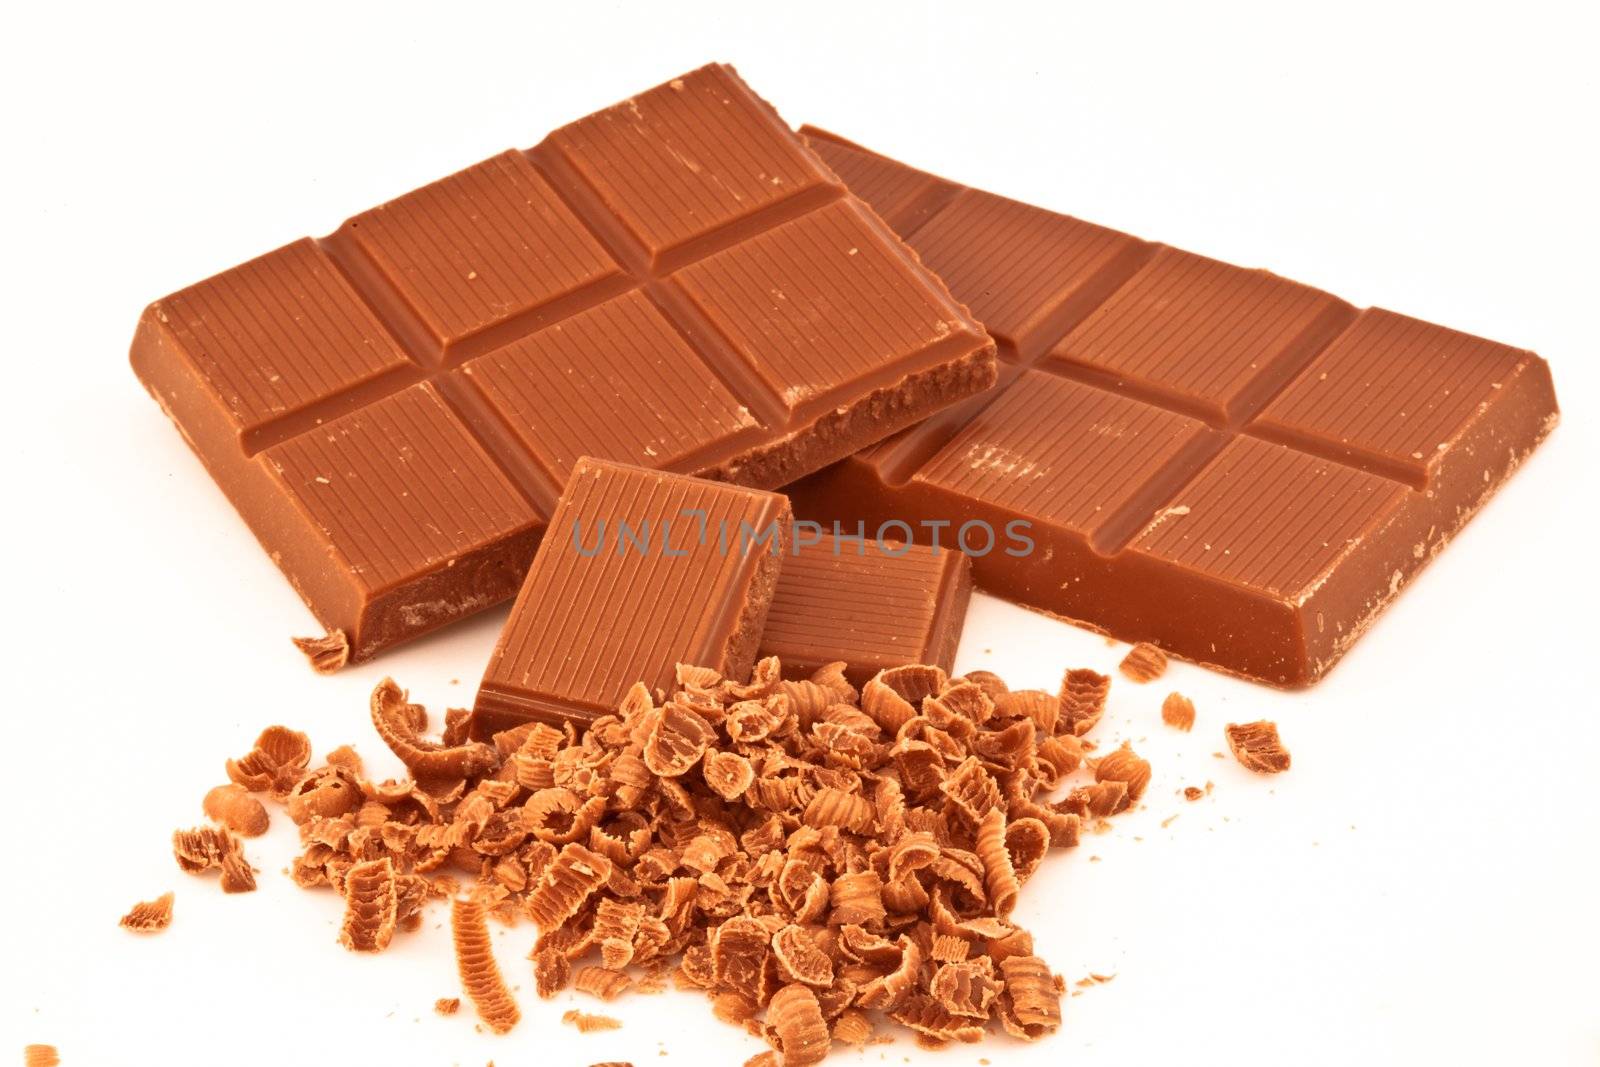 Bars of chocolate and chocolate shavings against a white background